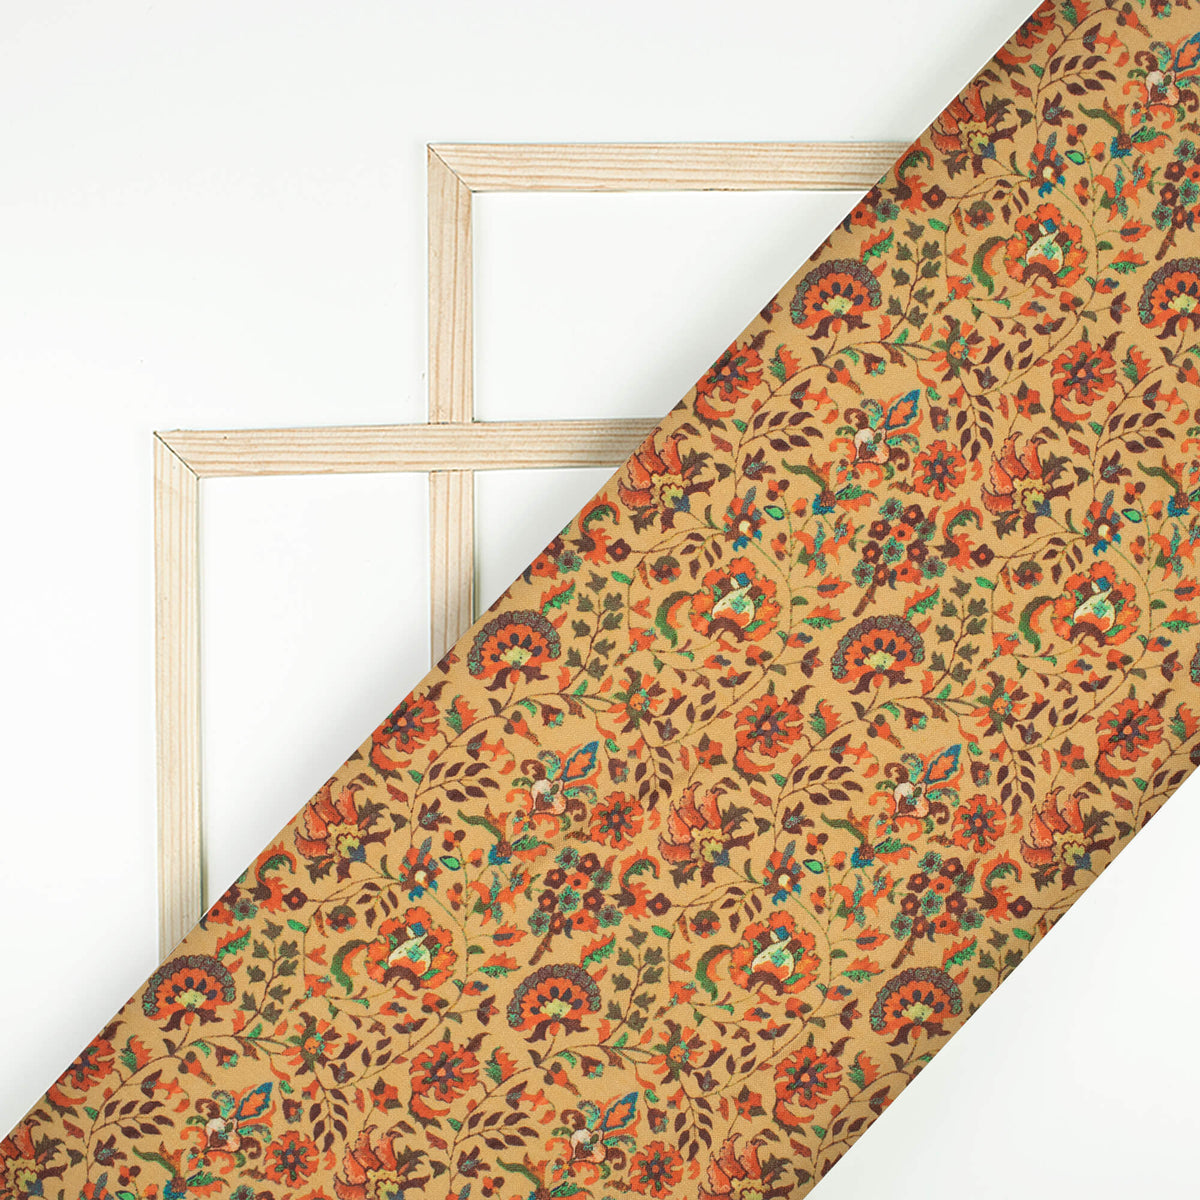 Ochre Yellow And Orange Floral Pattern Digital Print Linen Textured Fabric (Width 56 Inches)